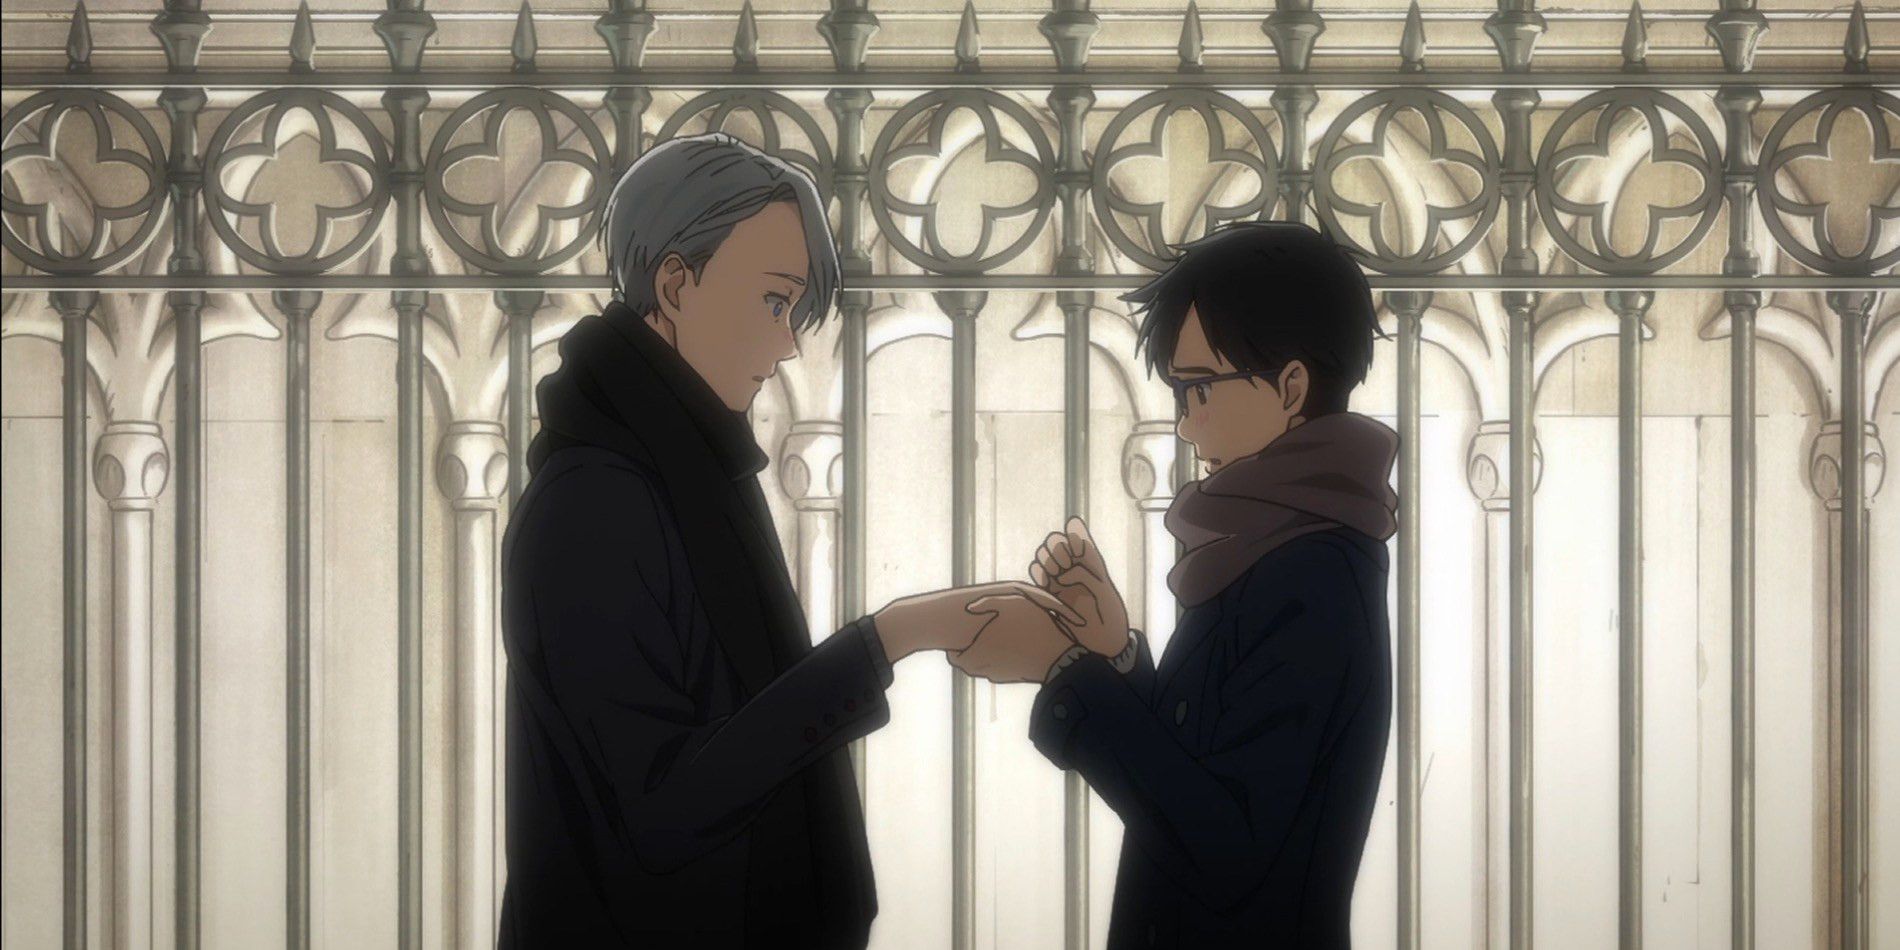 A screenshot from the Yuri!!! On Ice anime series of Yuri and Viktor standing in front of a gate holding hands.